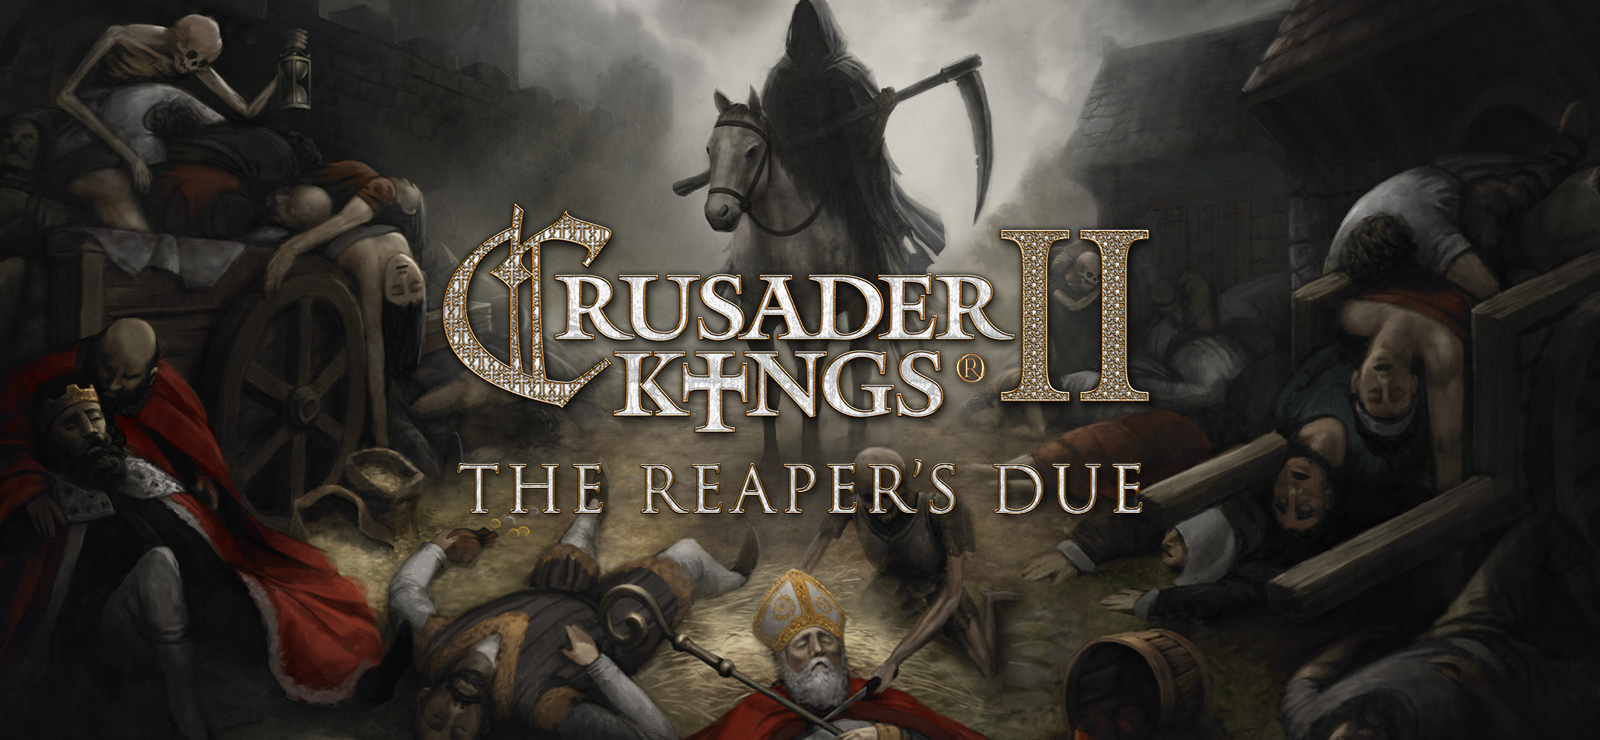 Expansion - Crusader Kings II: The Reaper's Due